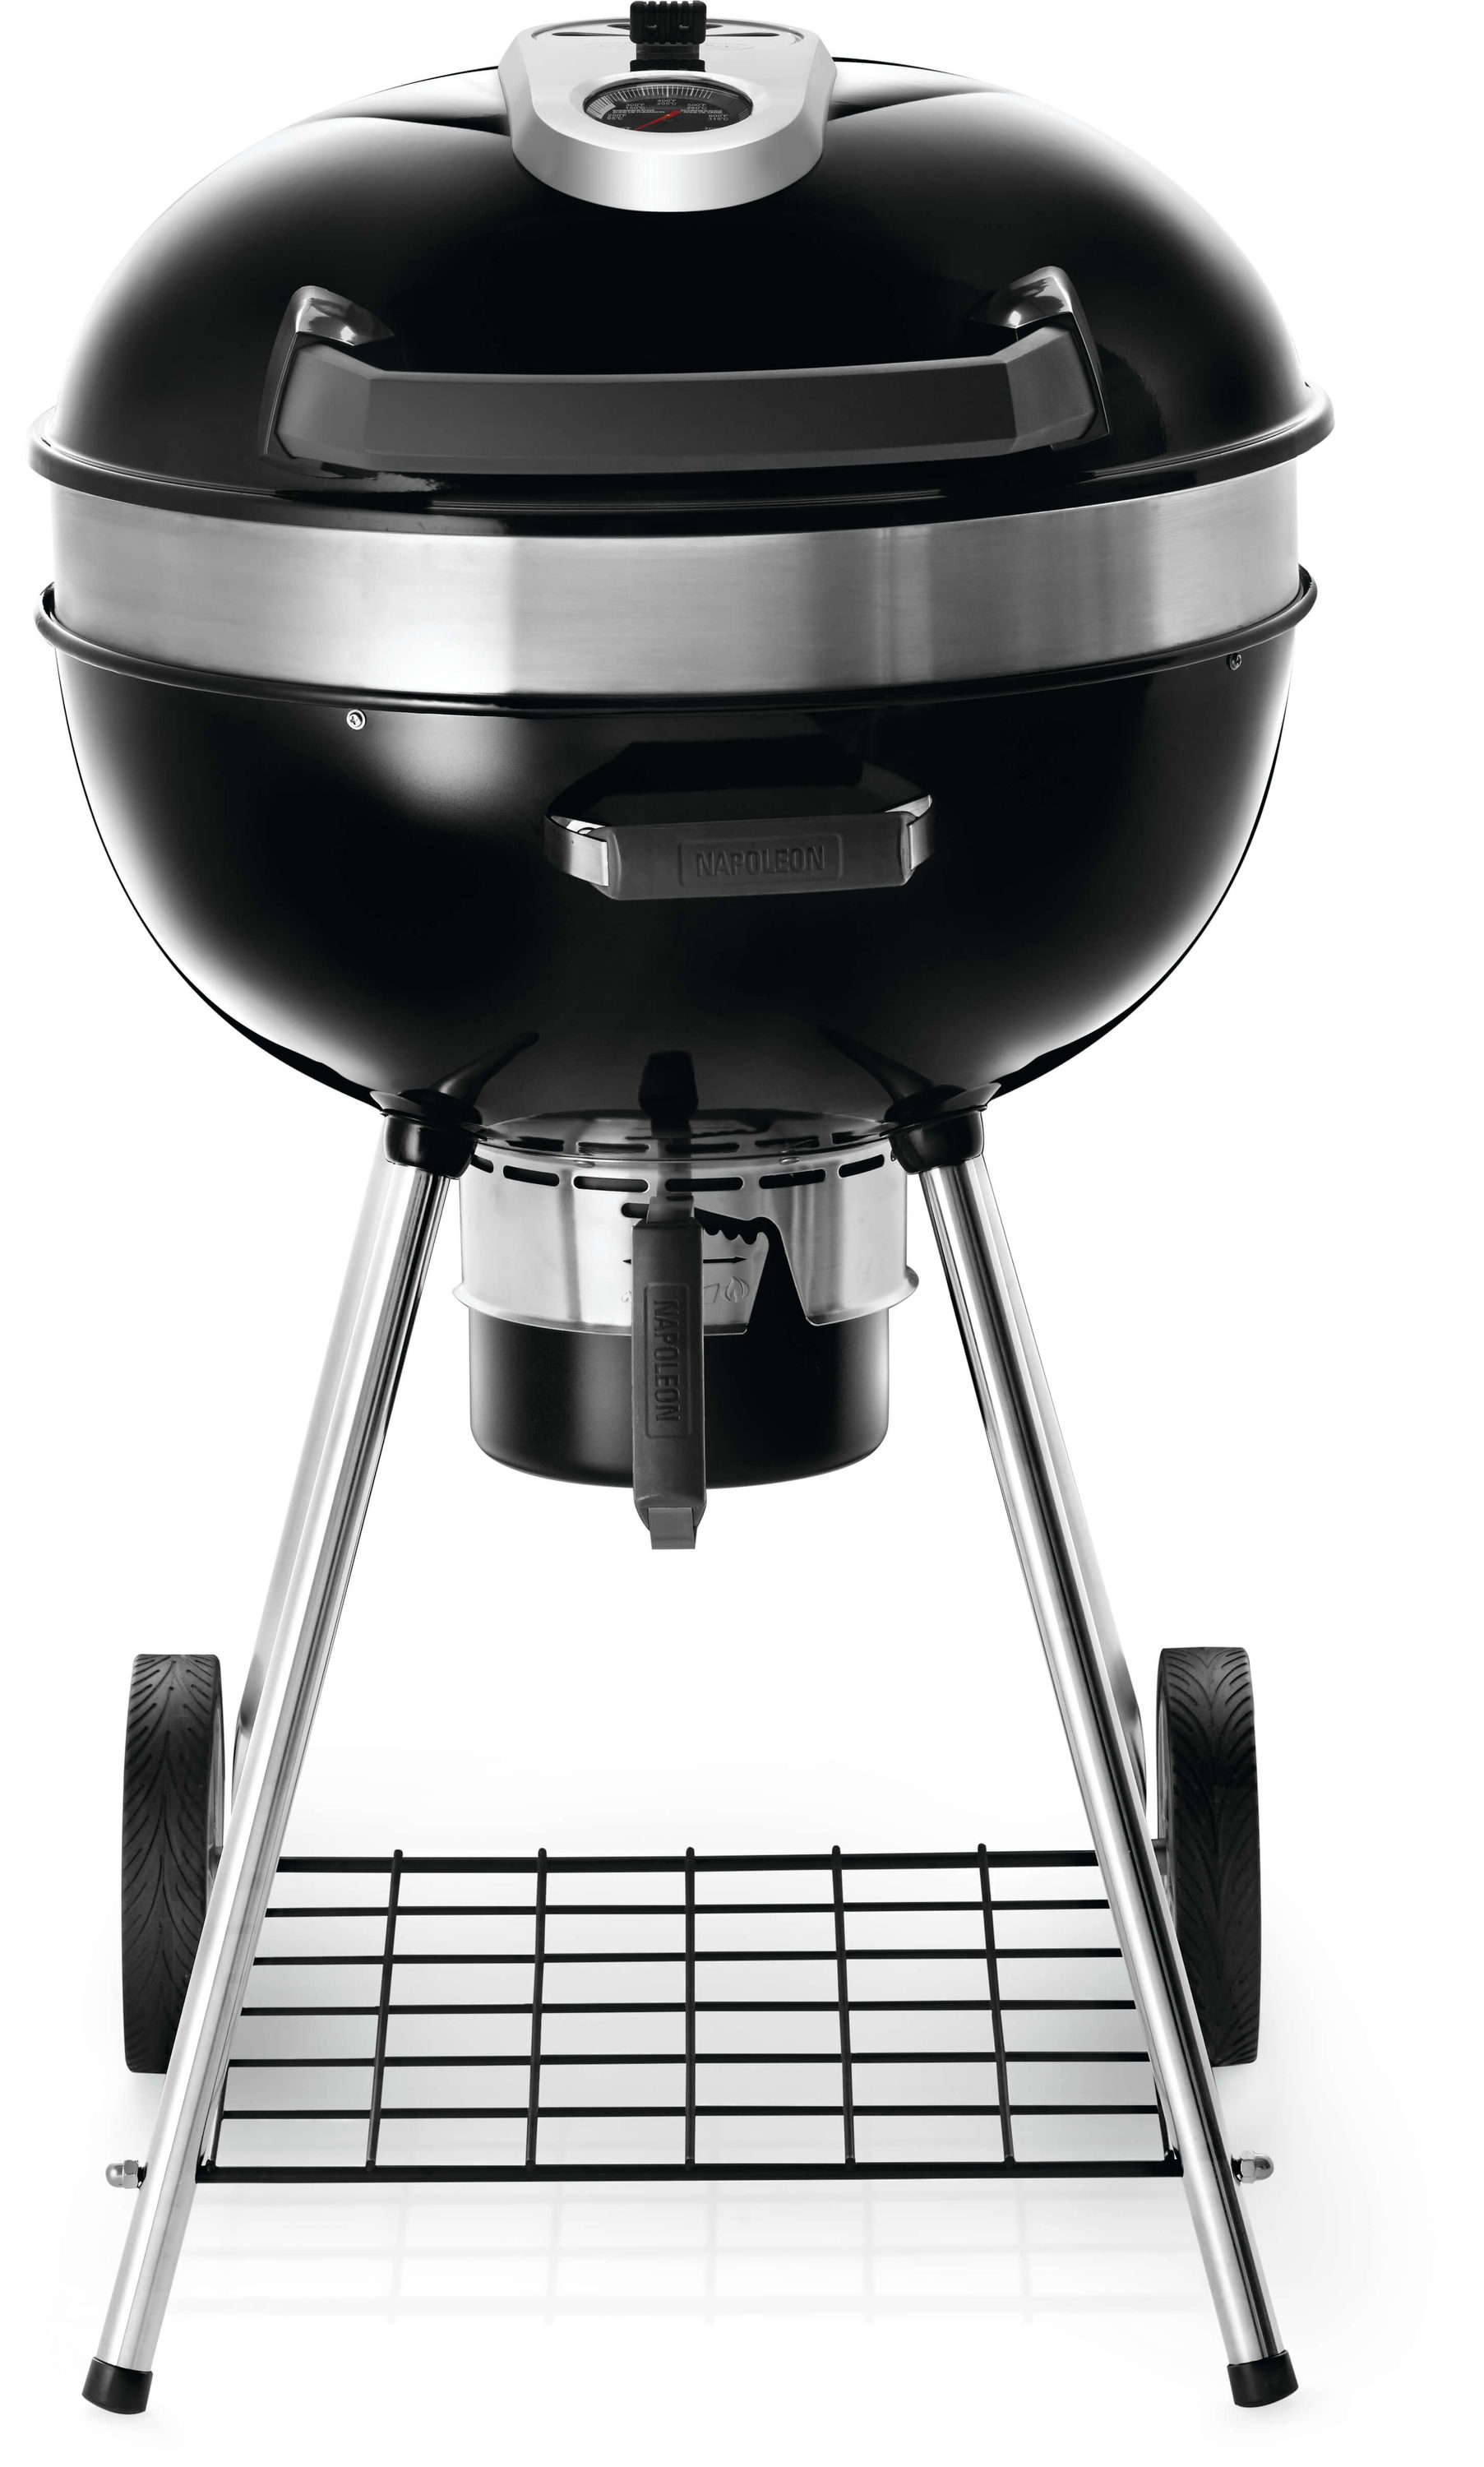 VEVOR Portable Charcoal Grill 21 x 21 x 8 in. Outdoor Park Style